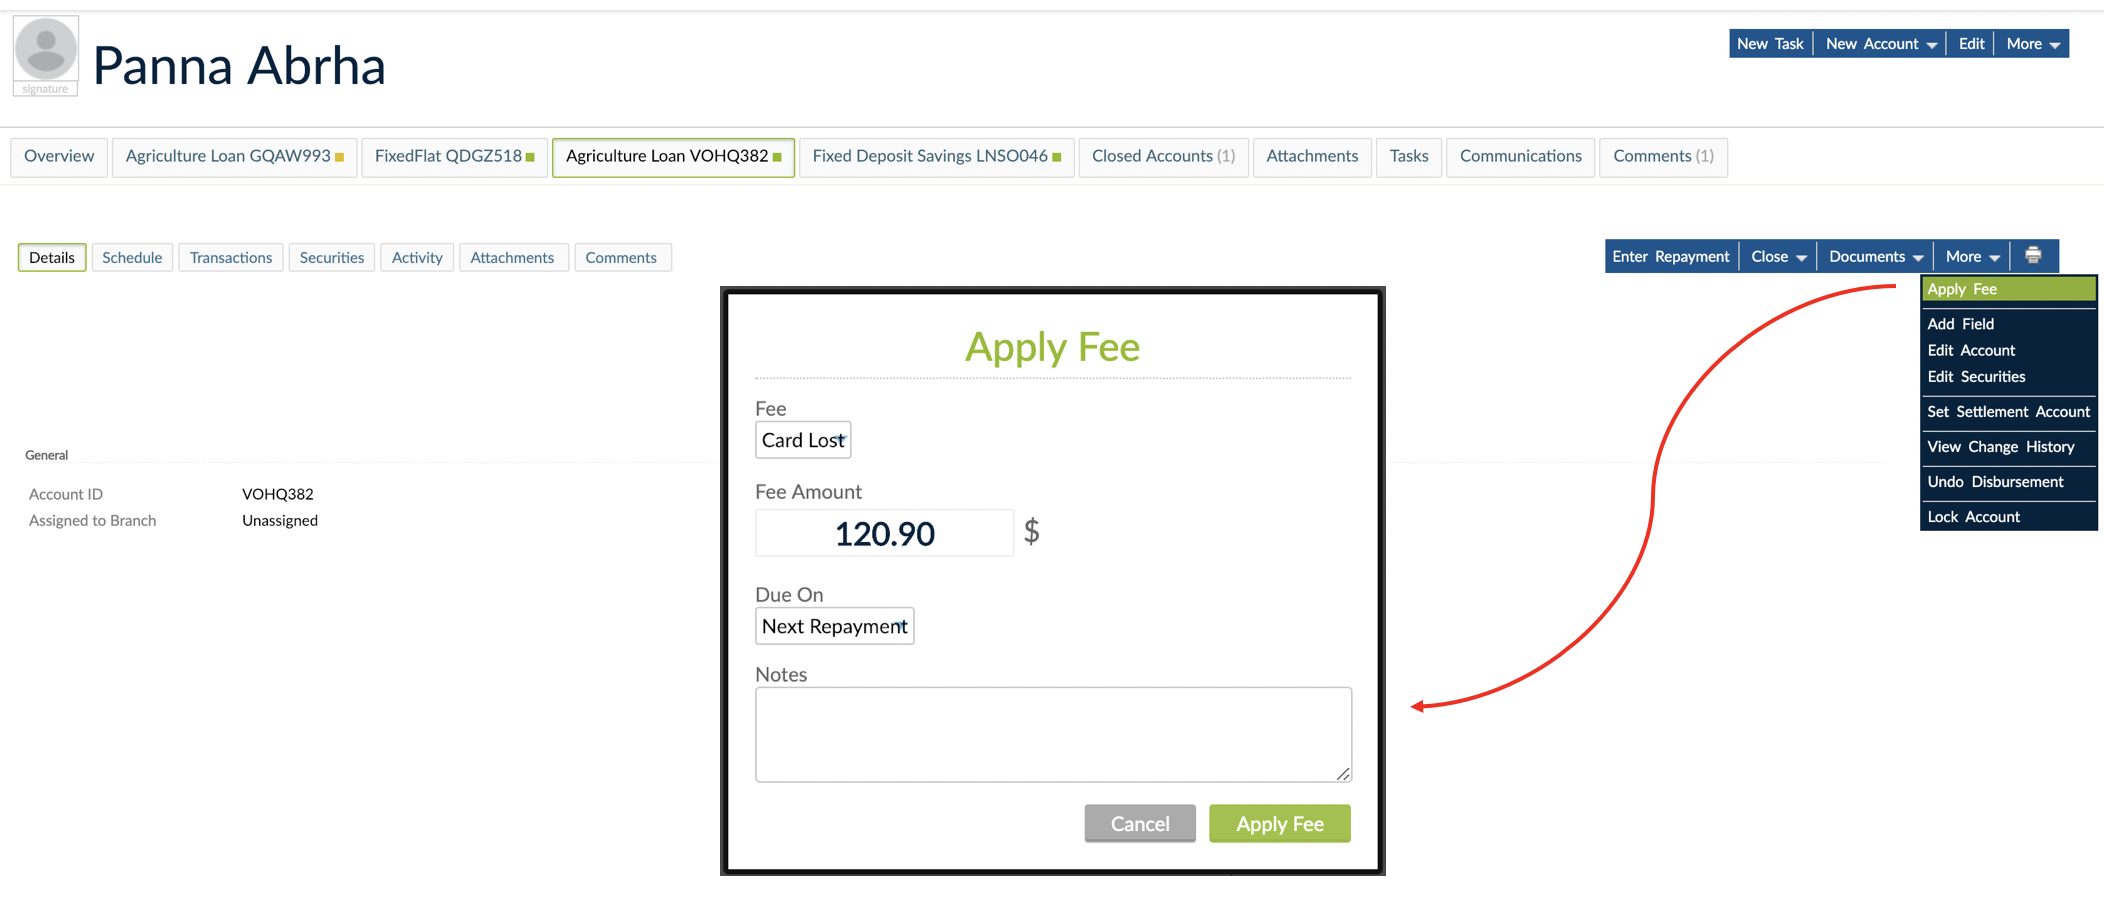 More dropdown with Apply Fee option and Apply fee dialogue